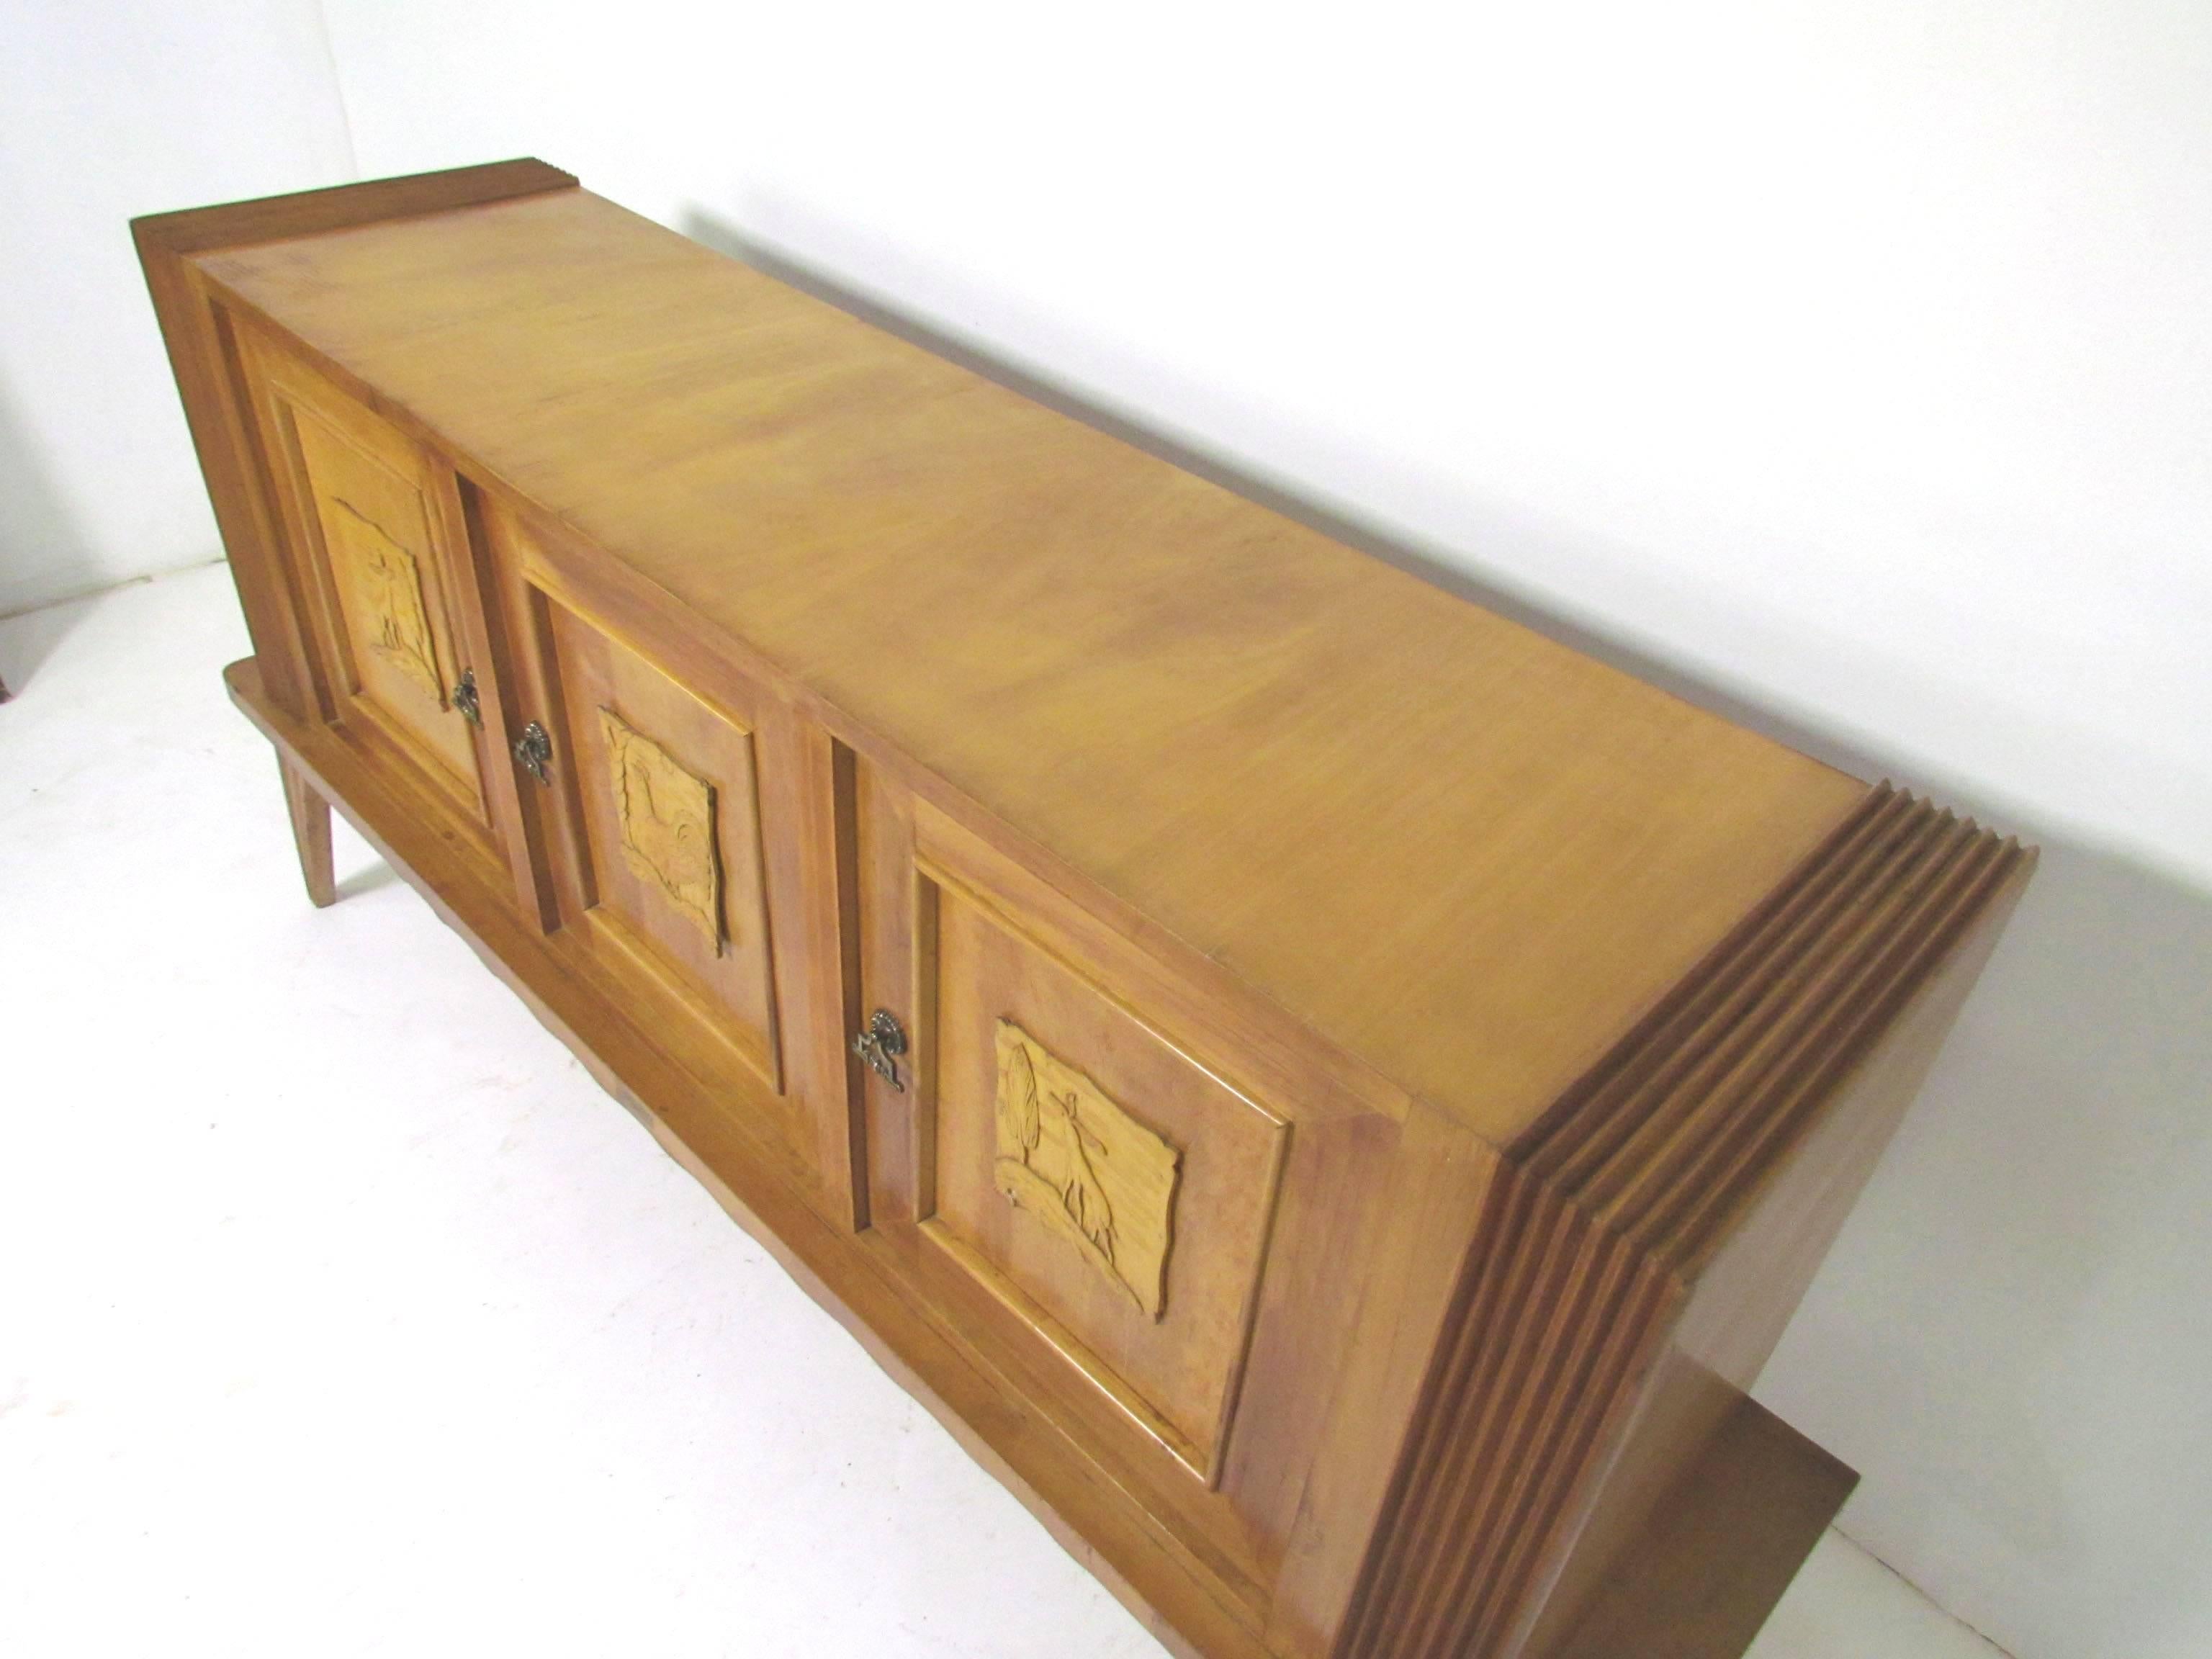 Wood Italian Art Deco Sideboard with Hand-Carved Decorative Panels, circa 1940s